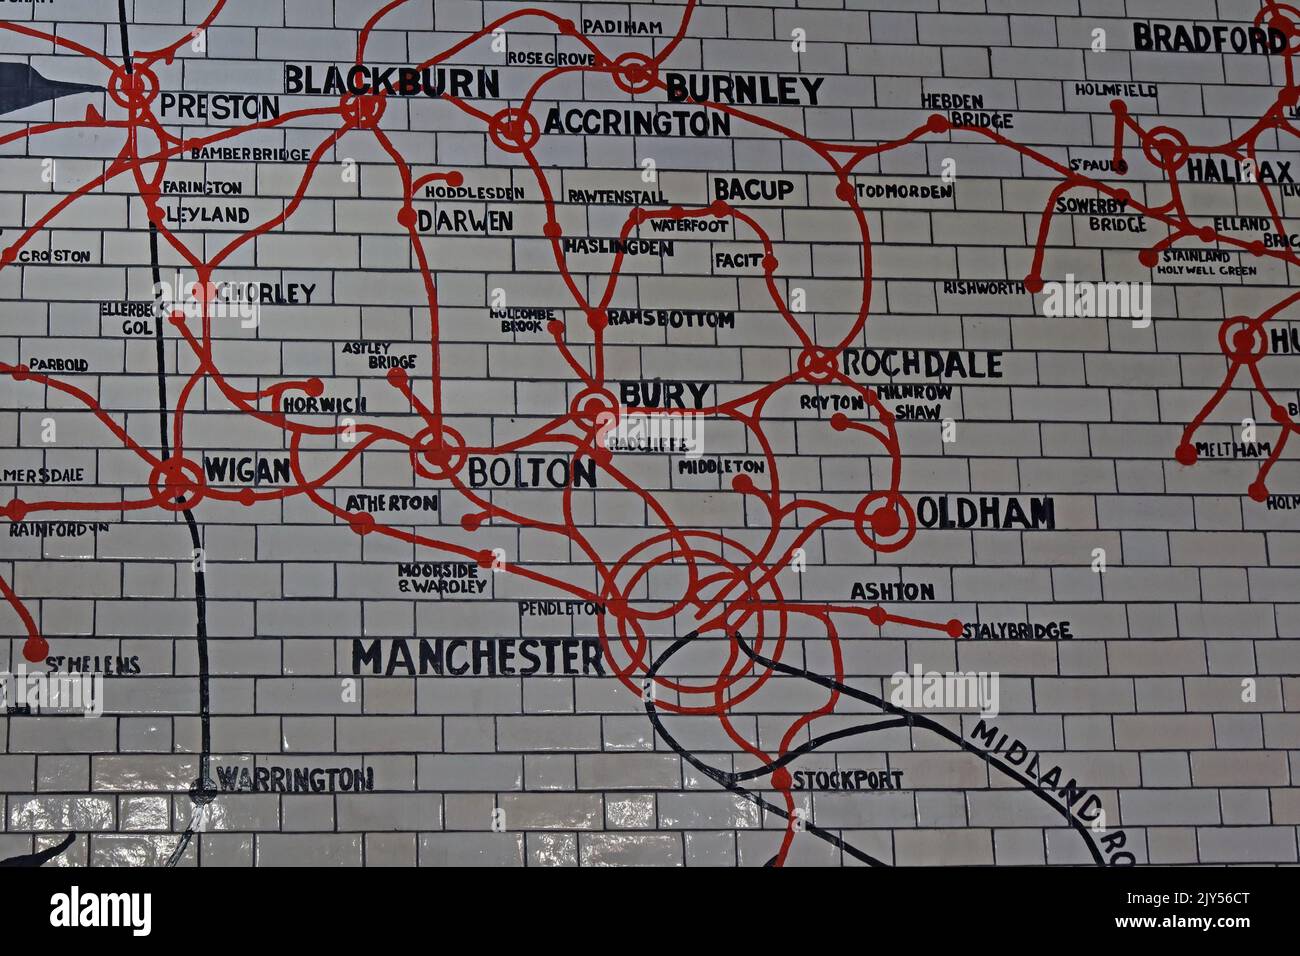 Old route map in tiles, Victoria Railway Station, Manchester, England, UK, M3 1WY - Greater Manchester services, Bolton,Bury,Oldham,Rochdale,Burnley, Stock Photo